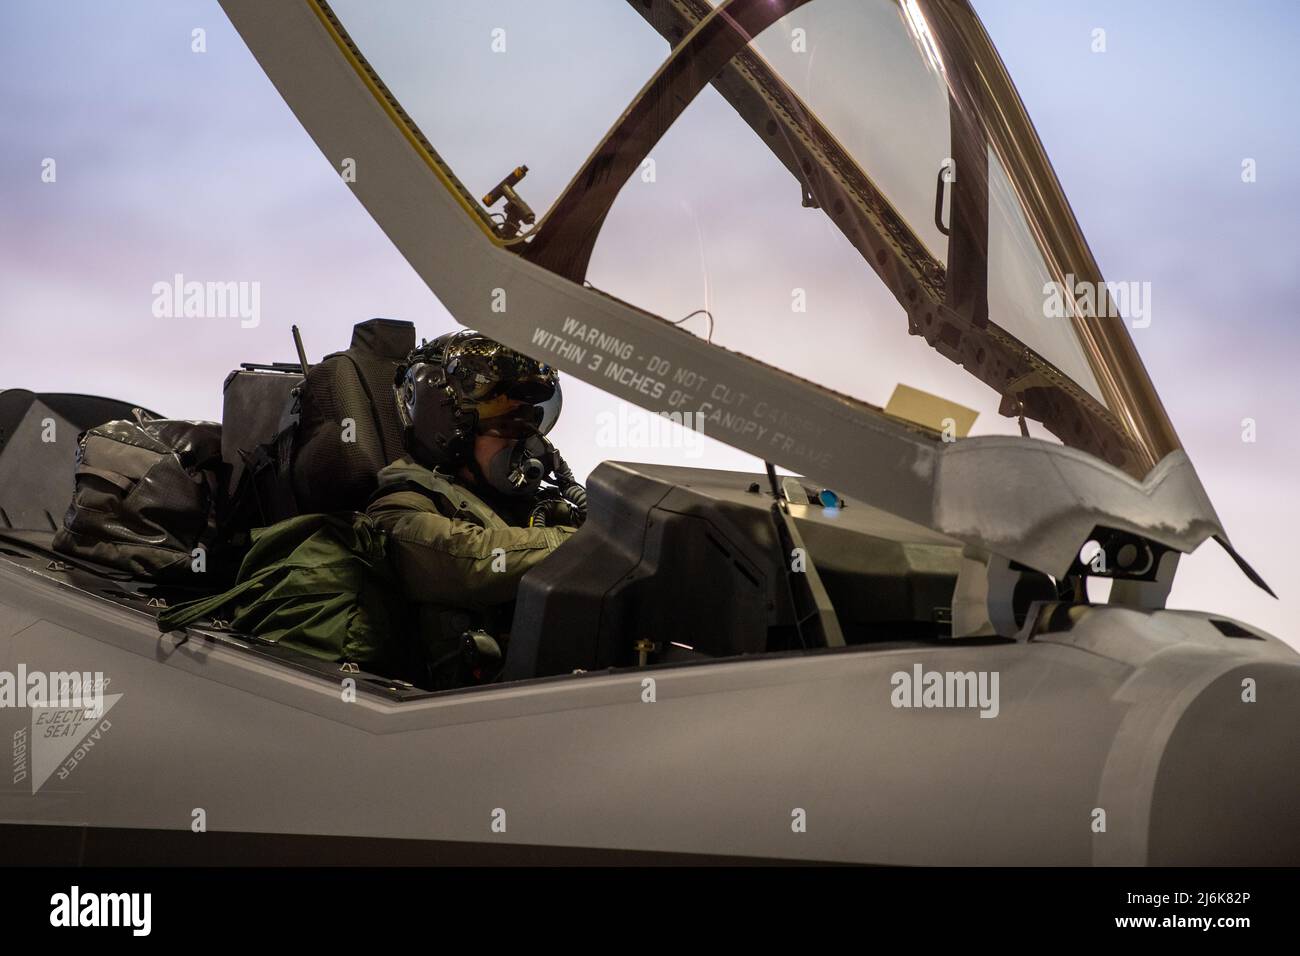 Vermont Air National Guard Base, USA. 2nd May, 2022. Credit: TSgt. Richard Mekkri/US Air Force/Alamy Live NewsBurlington, United States. 02 May, 2022. A U.S. Air Force pilot assigned to the 134th Fighter Squadron, 158th Fighter Wing, prepares for take off in a F-35A Lightning II fighter aircraft at the Vermont Air National Guard Base, May 2, 2022 in South Burlington, Vermont. The aircraft is rebasing to Spangdahlem Air Base, Germany, to join the NATO Enhanced Air Policing mission. Credit: Planetpix/Alamy Live News Stock Photo